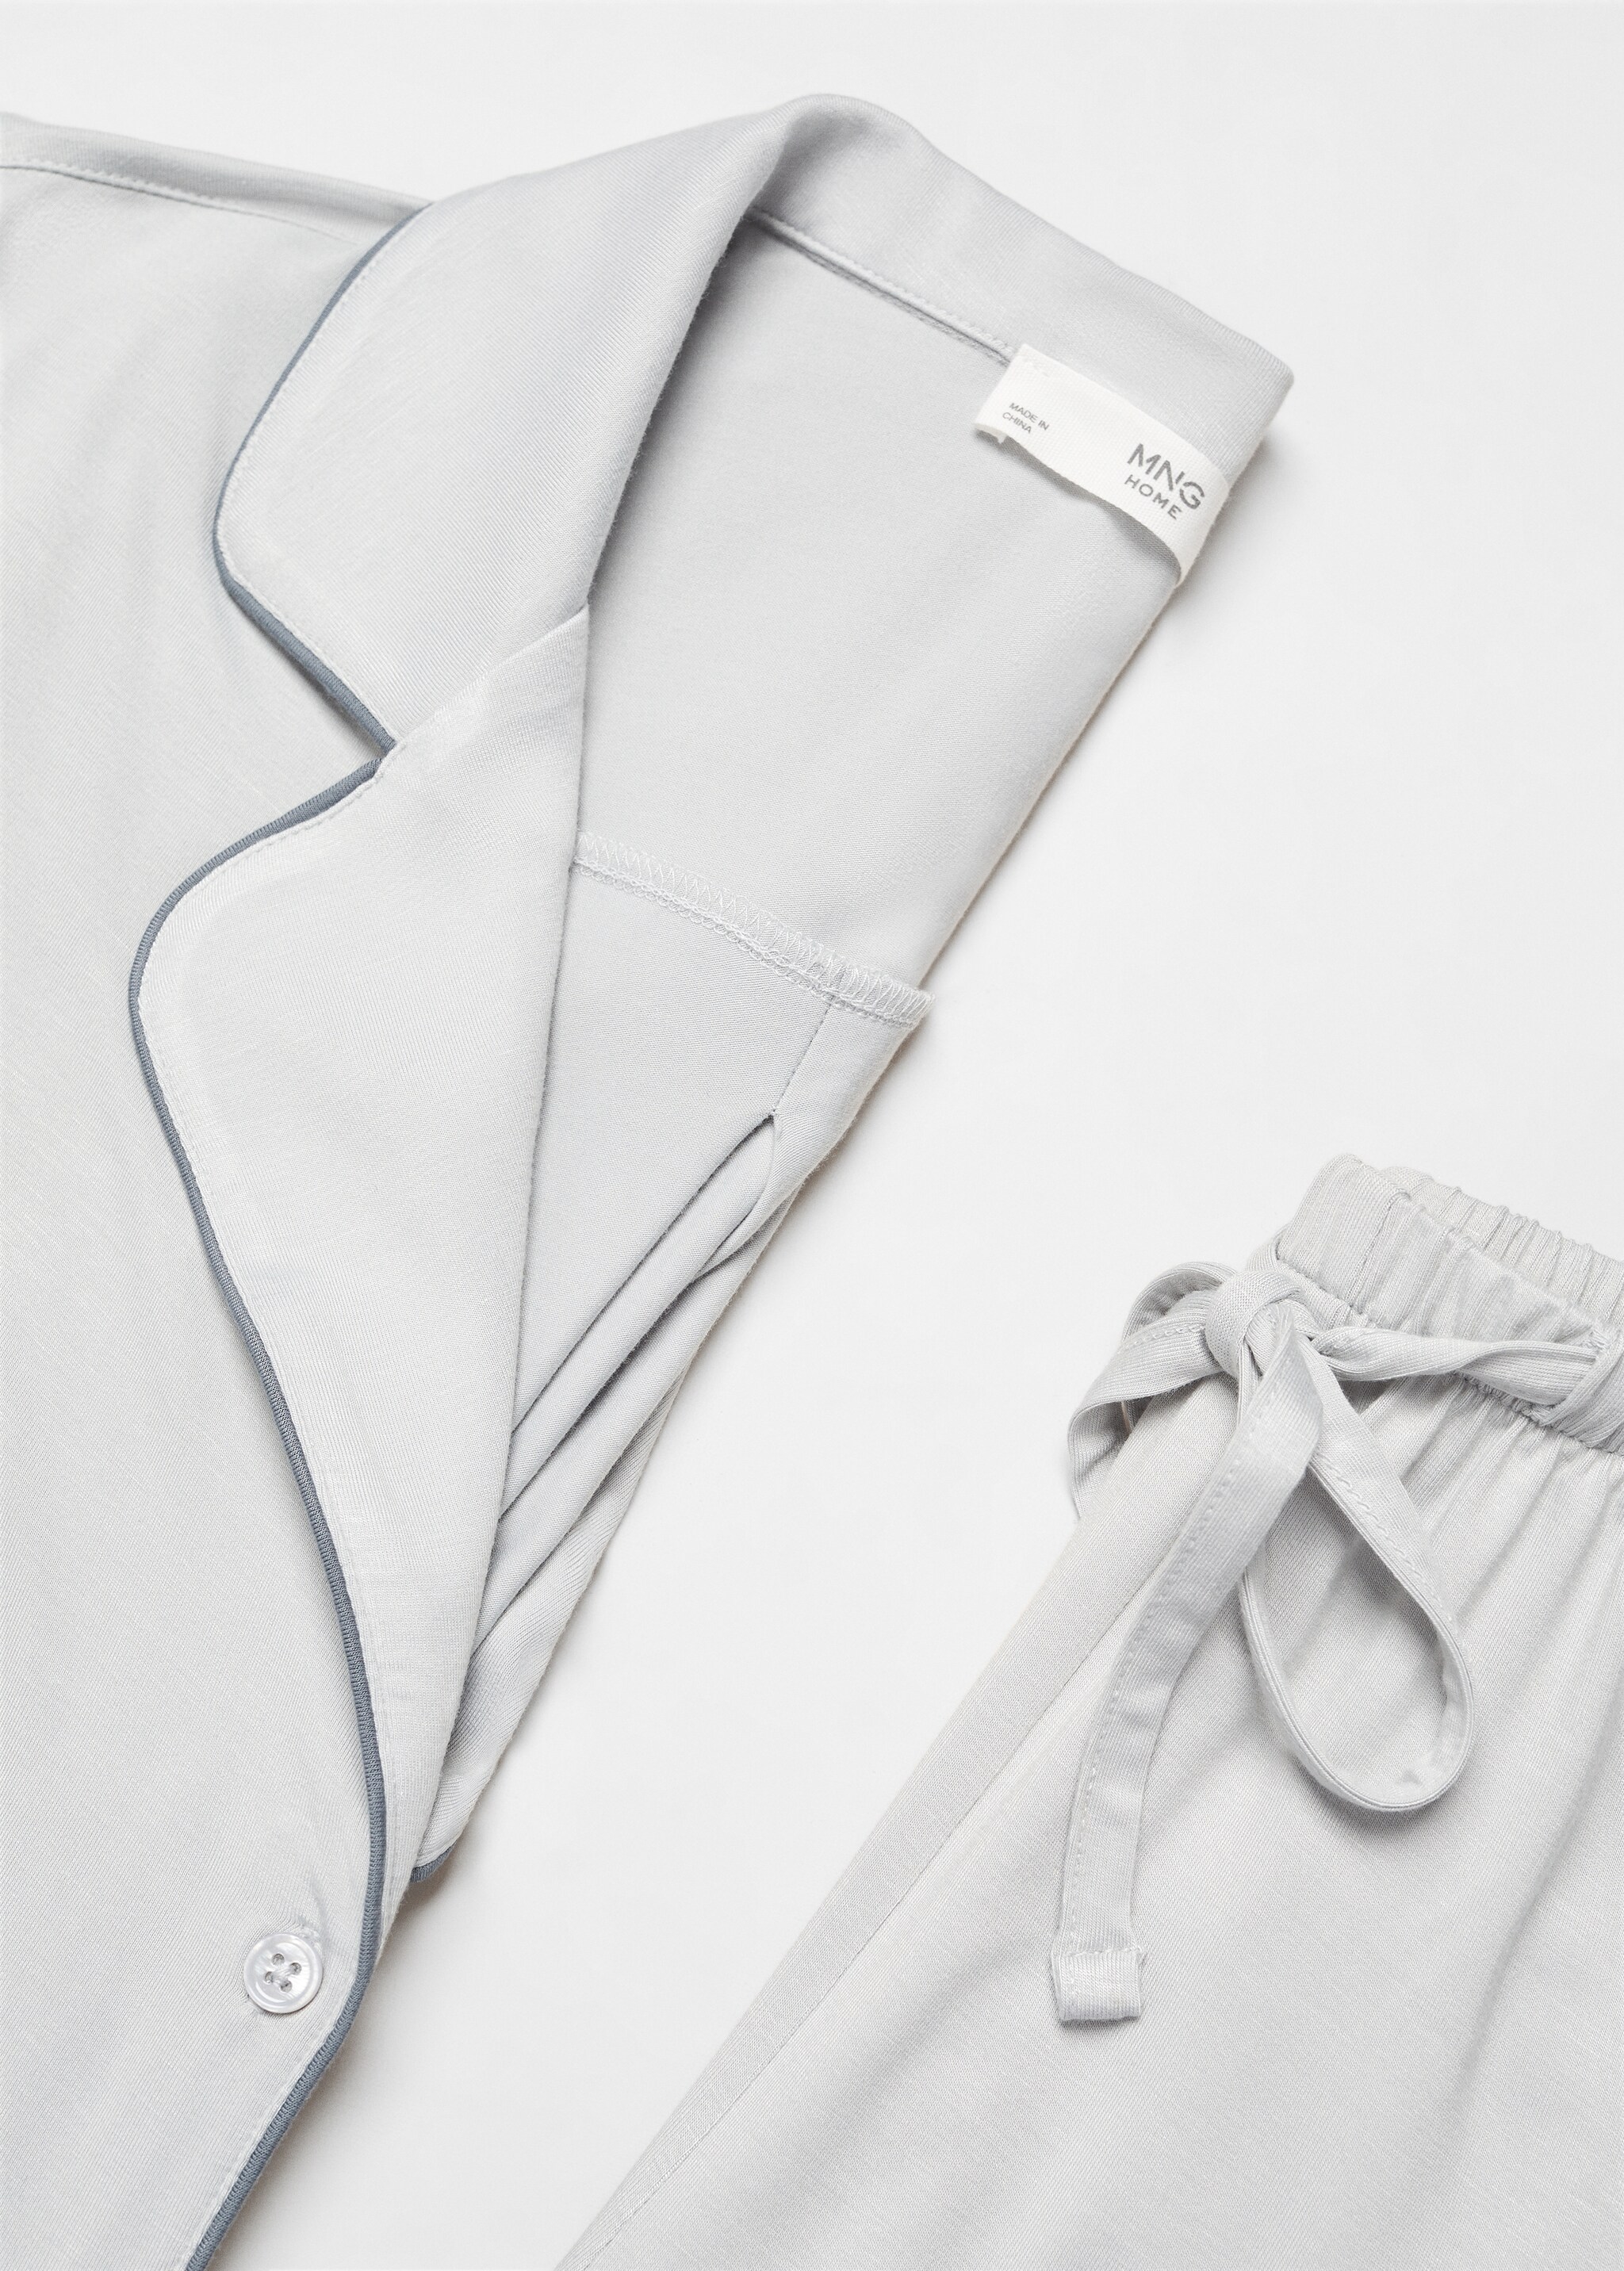 Pyjama shirt with trim - Details of the article 8